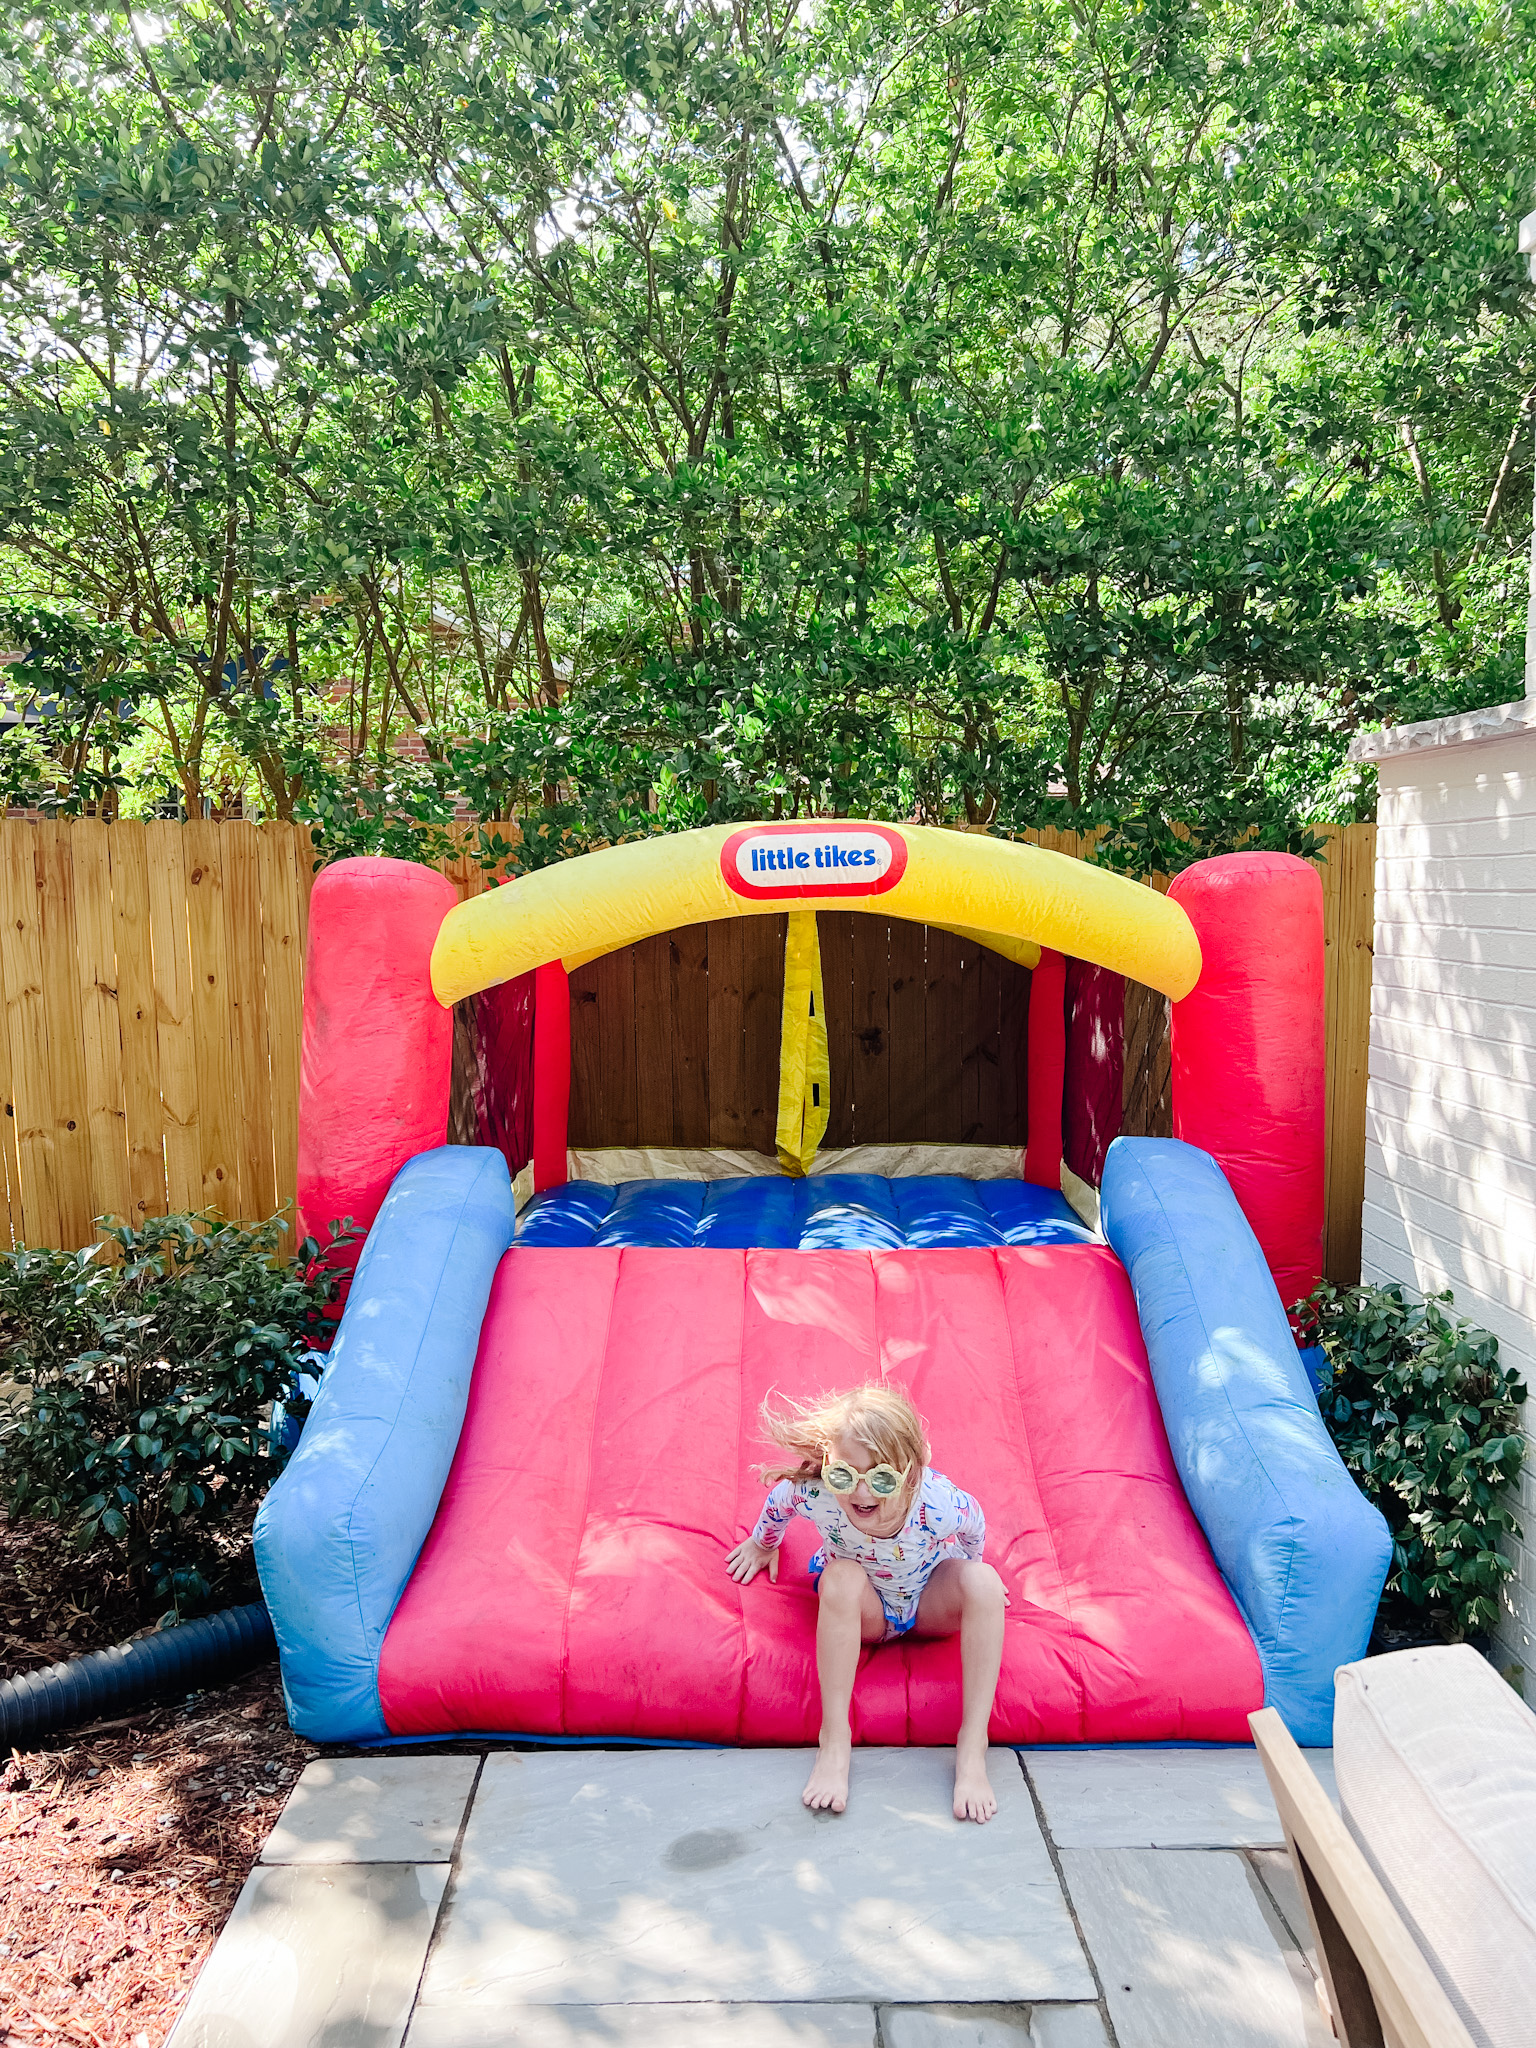 No Pool, No Problem: The Best Backyard Toys for Summer